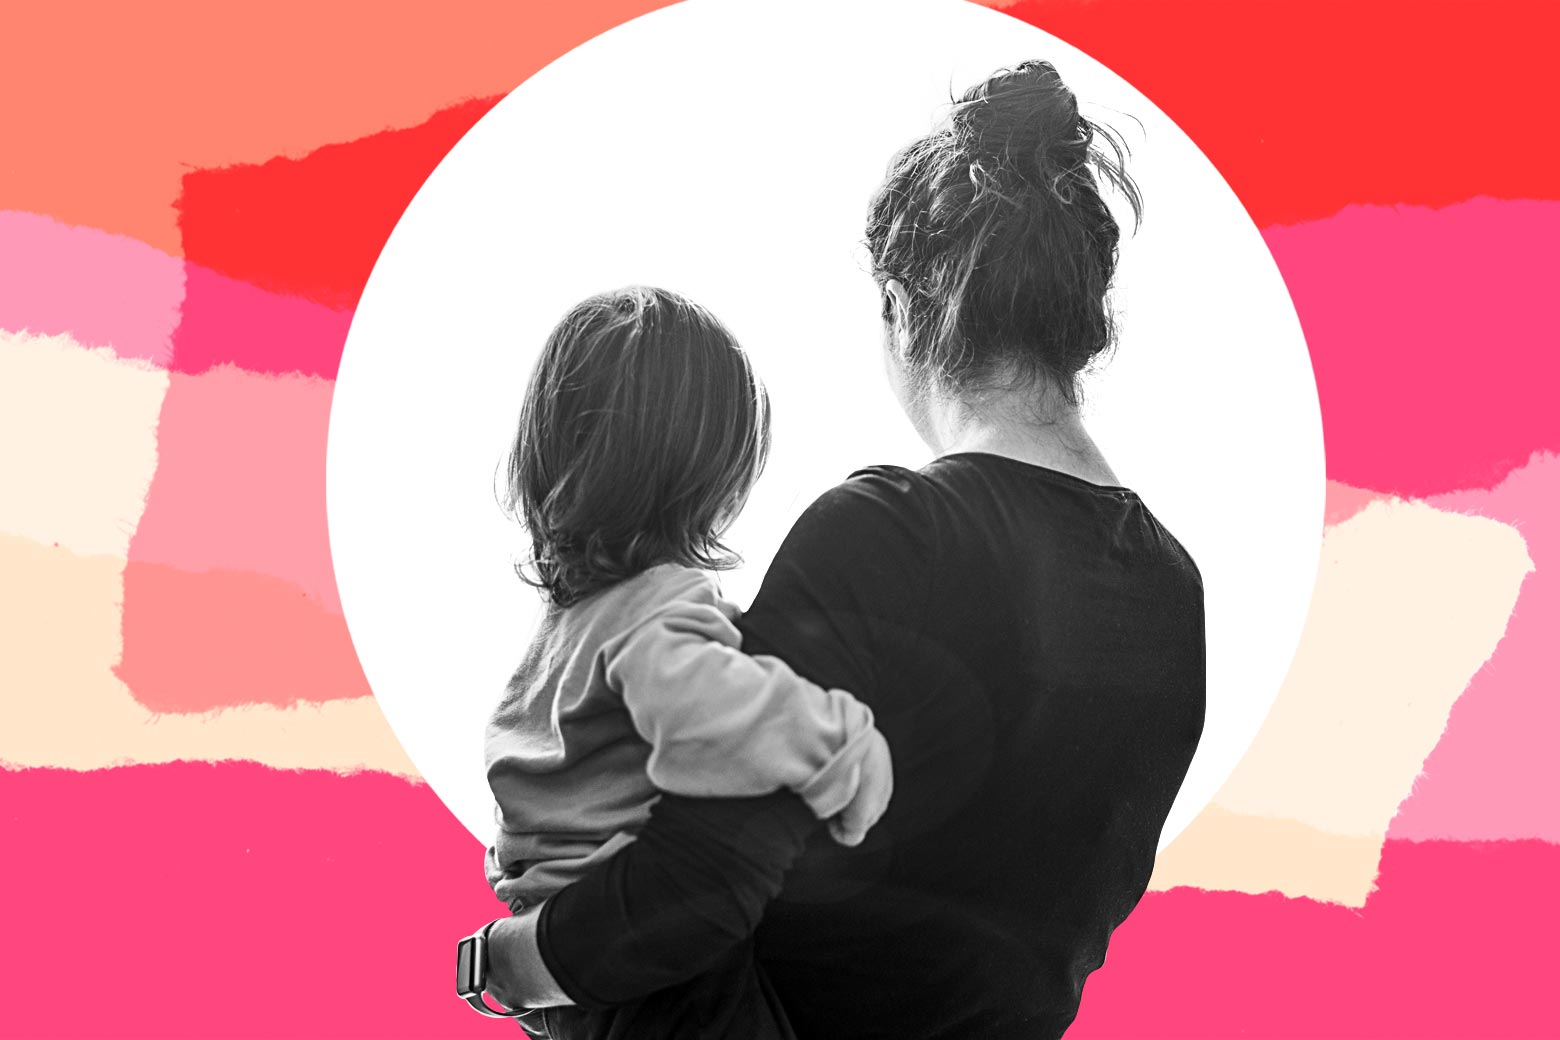 Photo illustration of a woman holding a small child. Both have their backs turned to the camera.